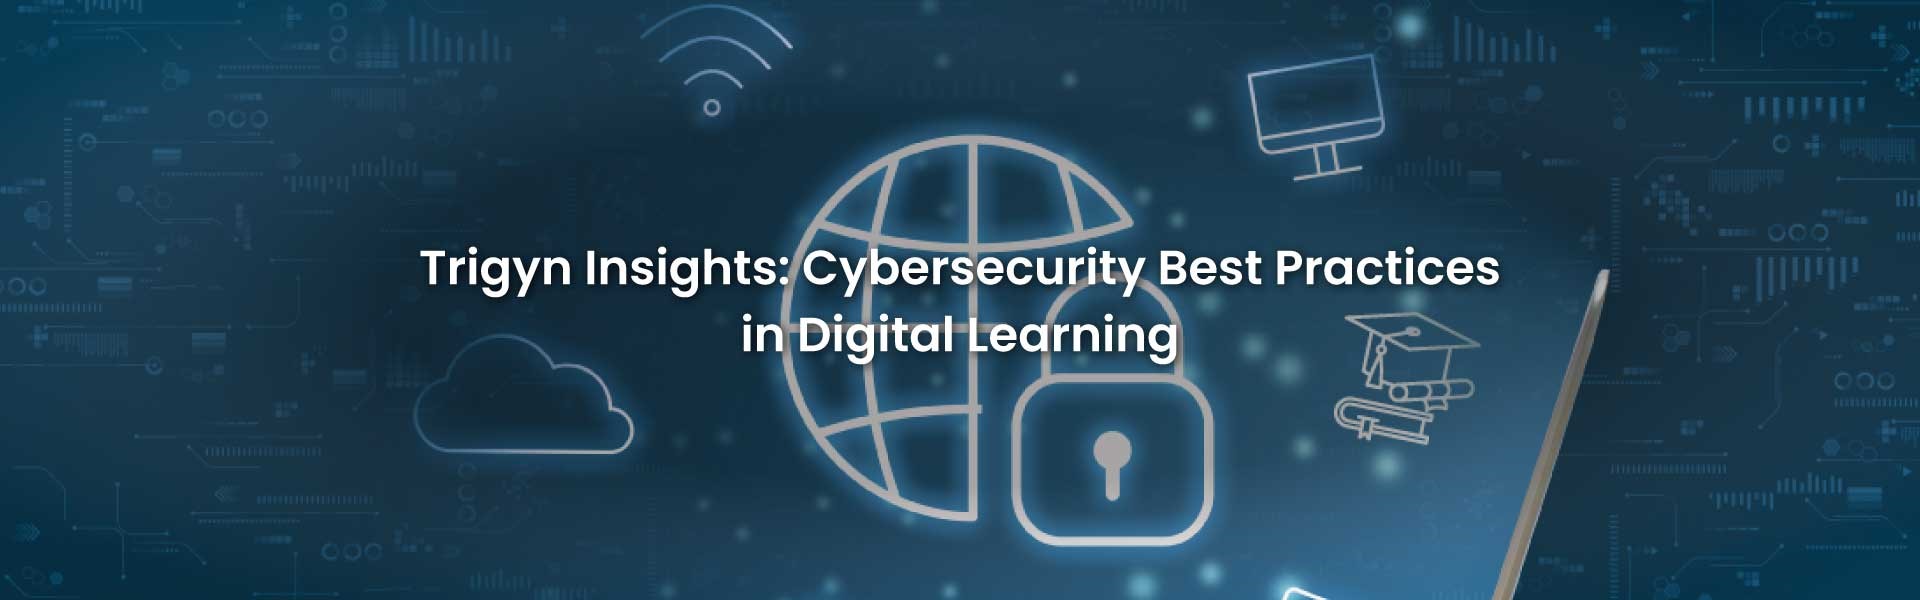 Security Best Practices in Digital Learning